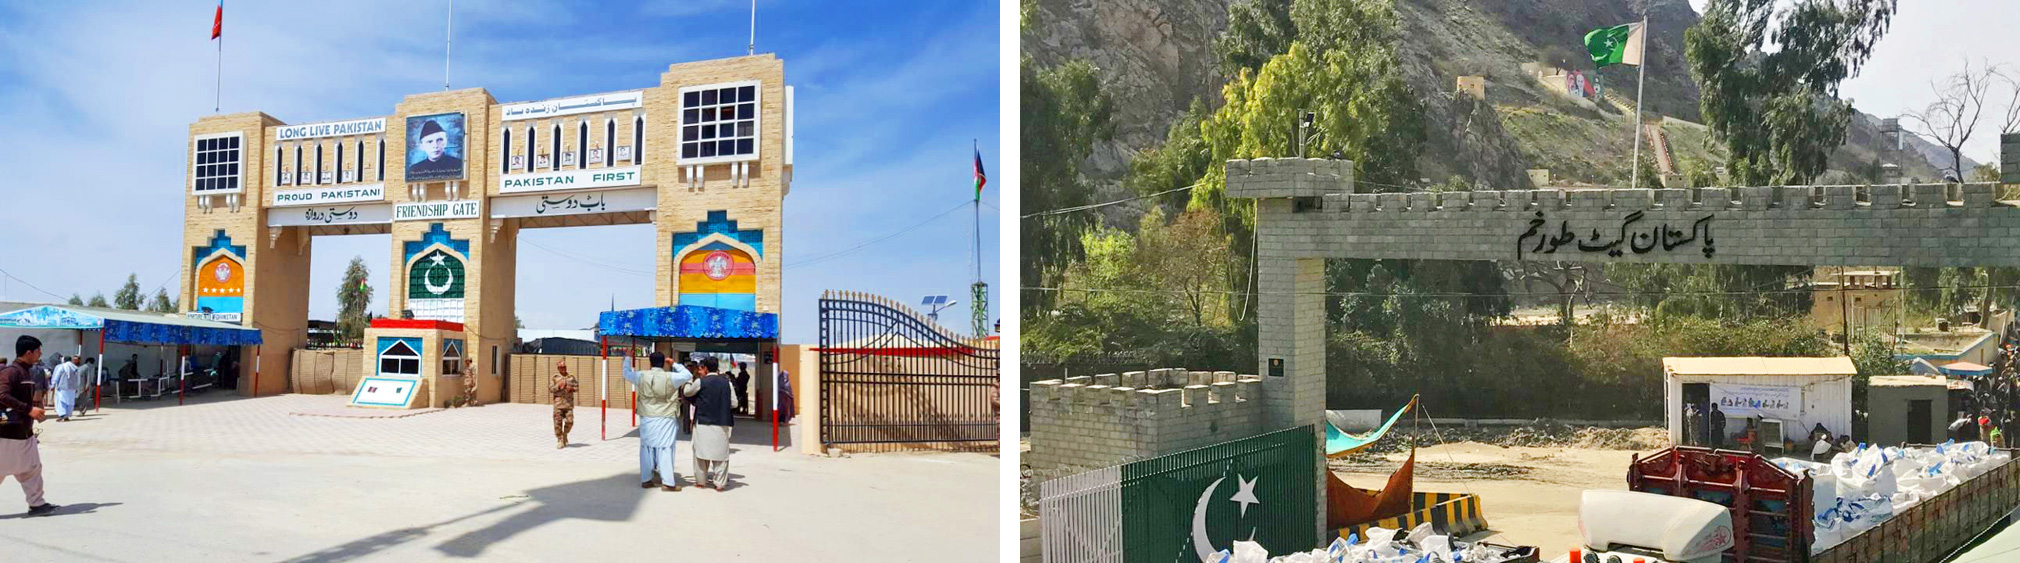 The Friendship Gate (R) and Torkham (L) are two of the Pakistan-Afghanistan border crossings where all-age polio vaccinations are carried out. ©WHO/Pakistan.